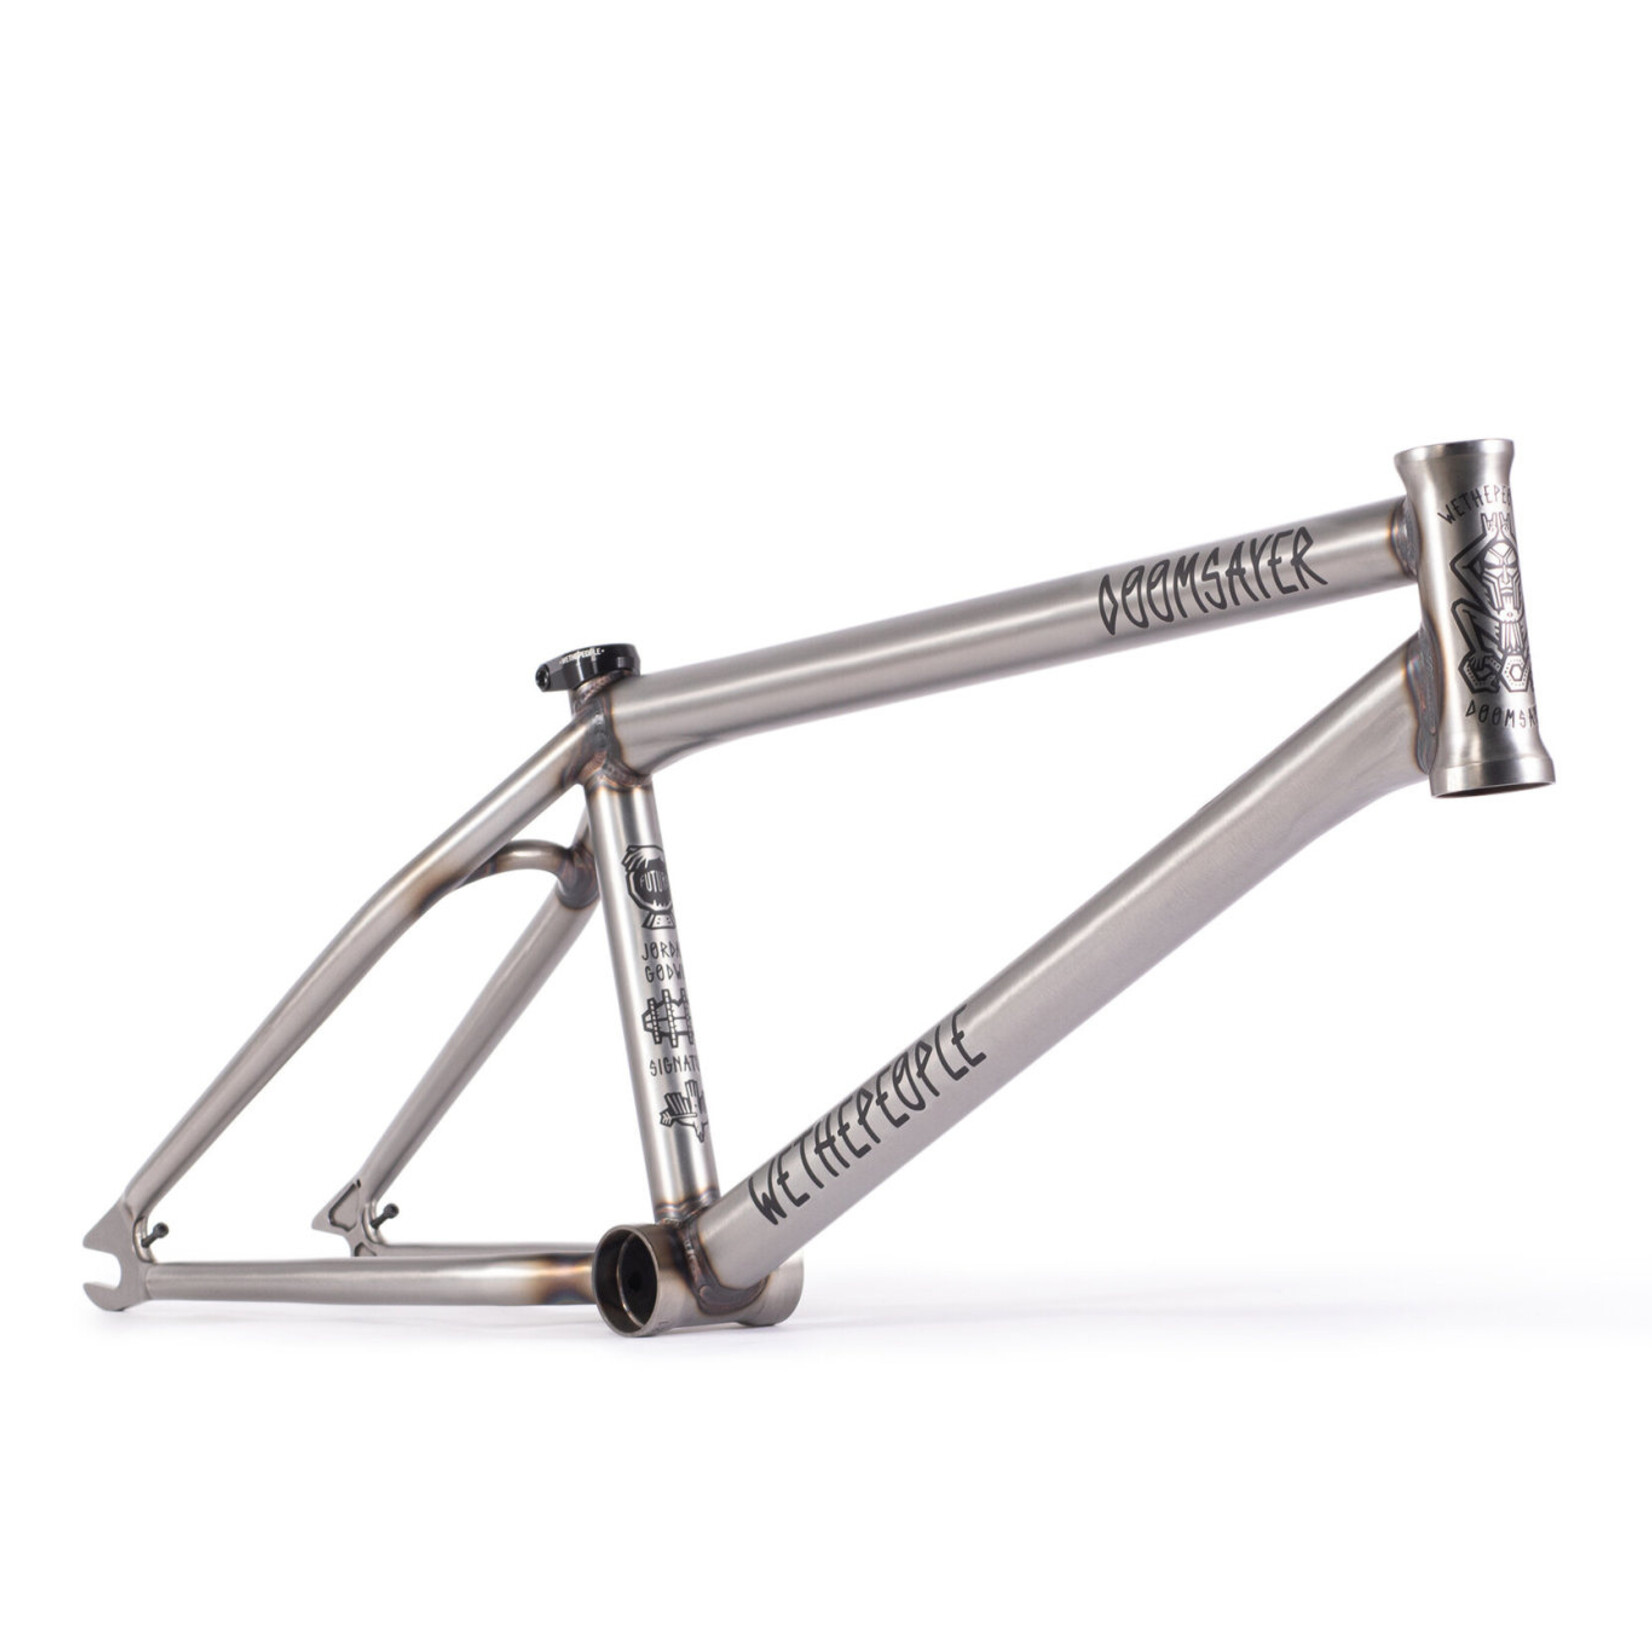 We the People We The People Doomsayer BMX Frame - 20.75" TT, Matte Raw